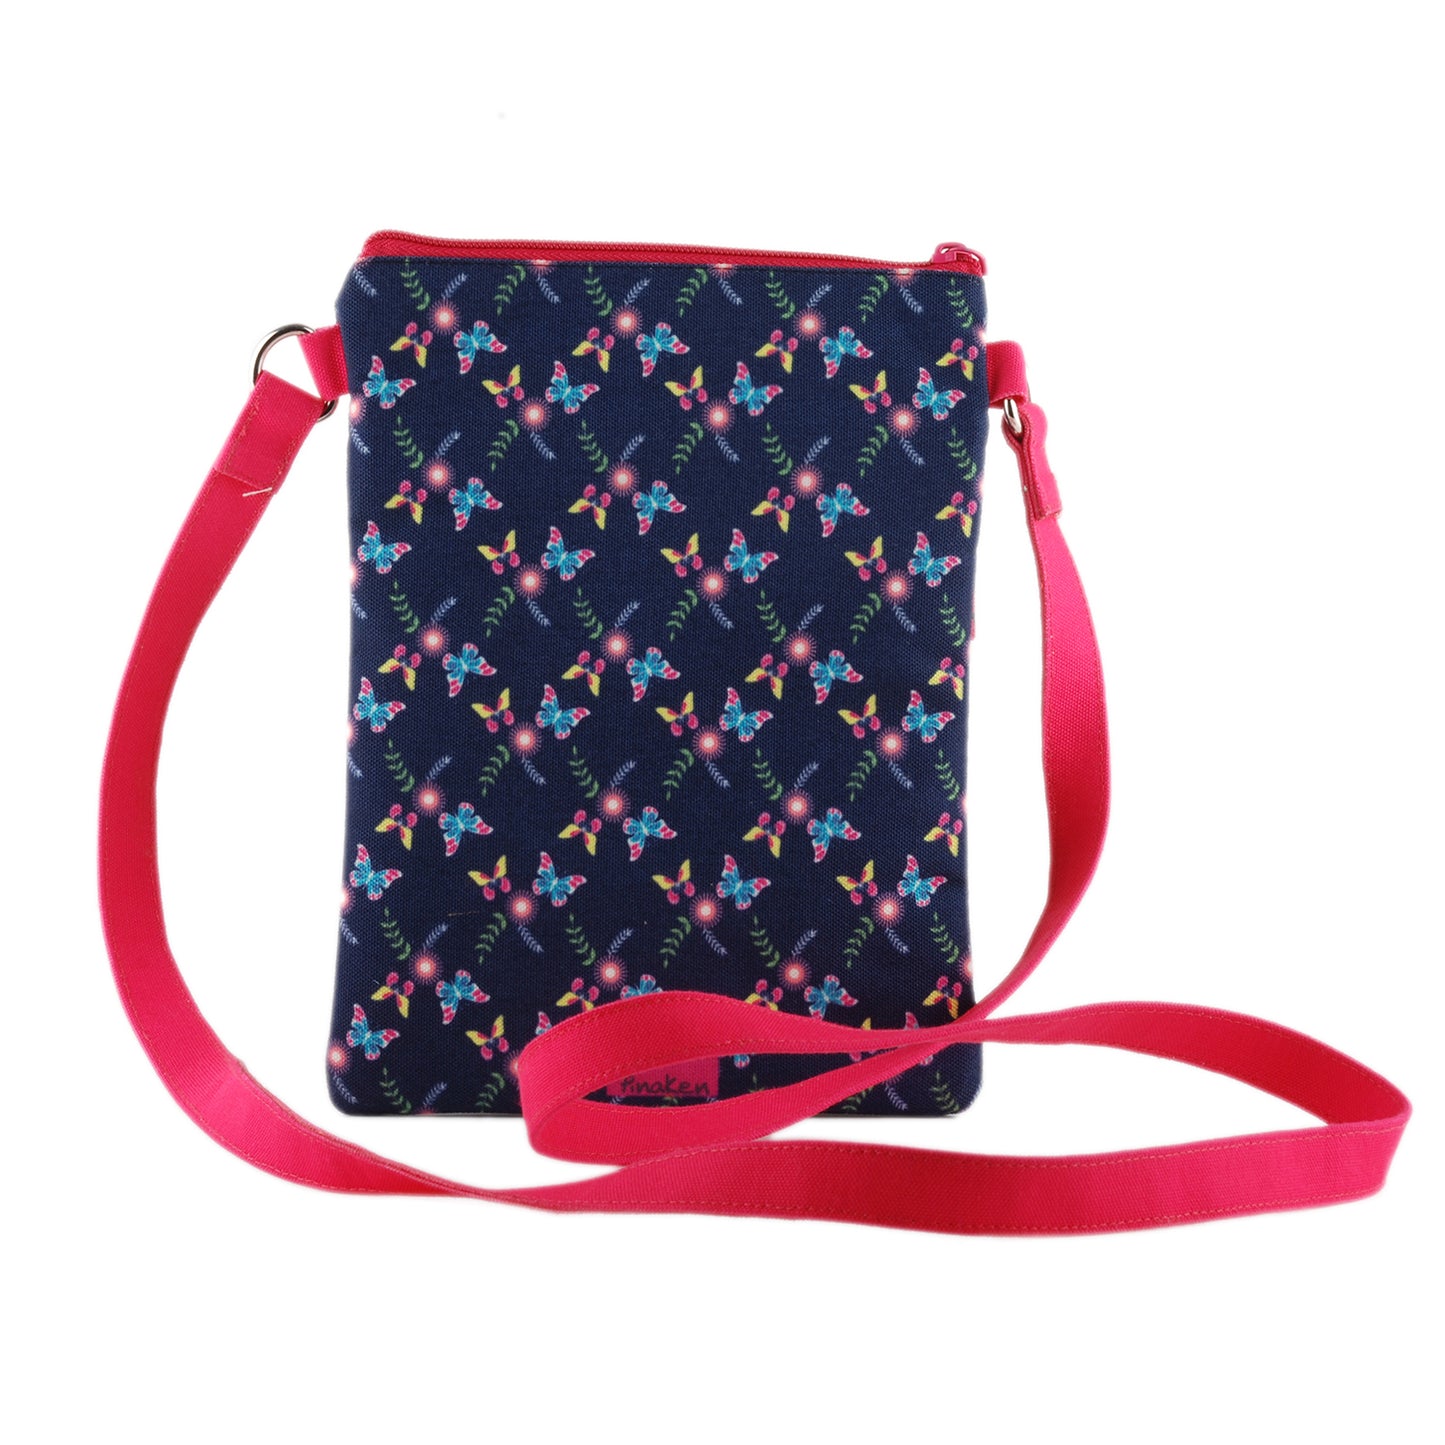 Butterfly Bloom Small Sling Bag